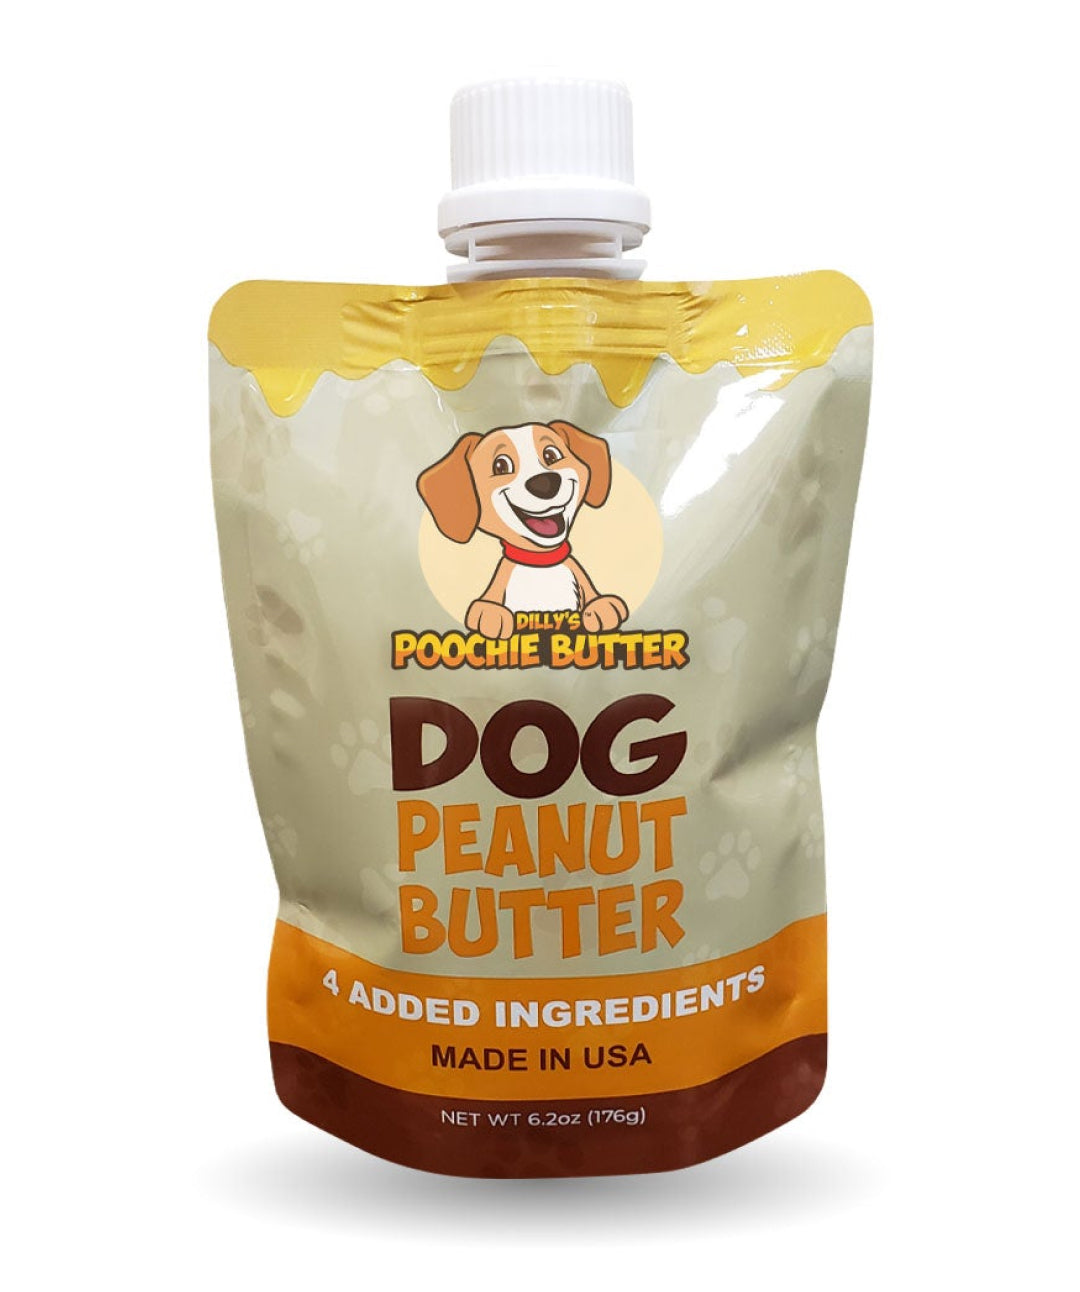 Poochie Peanut Butter Dog Treat – Rover Store